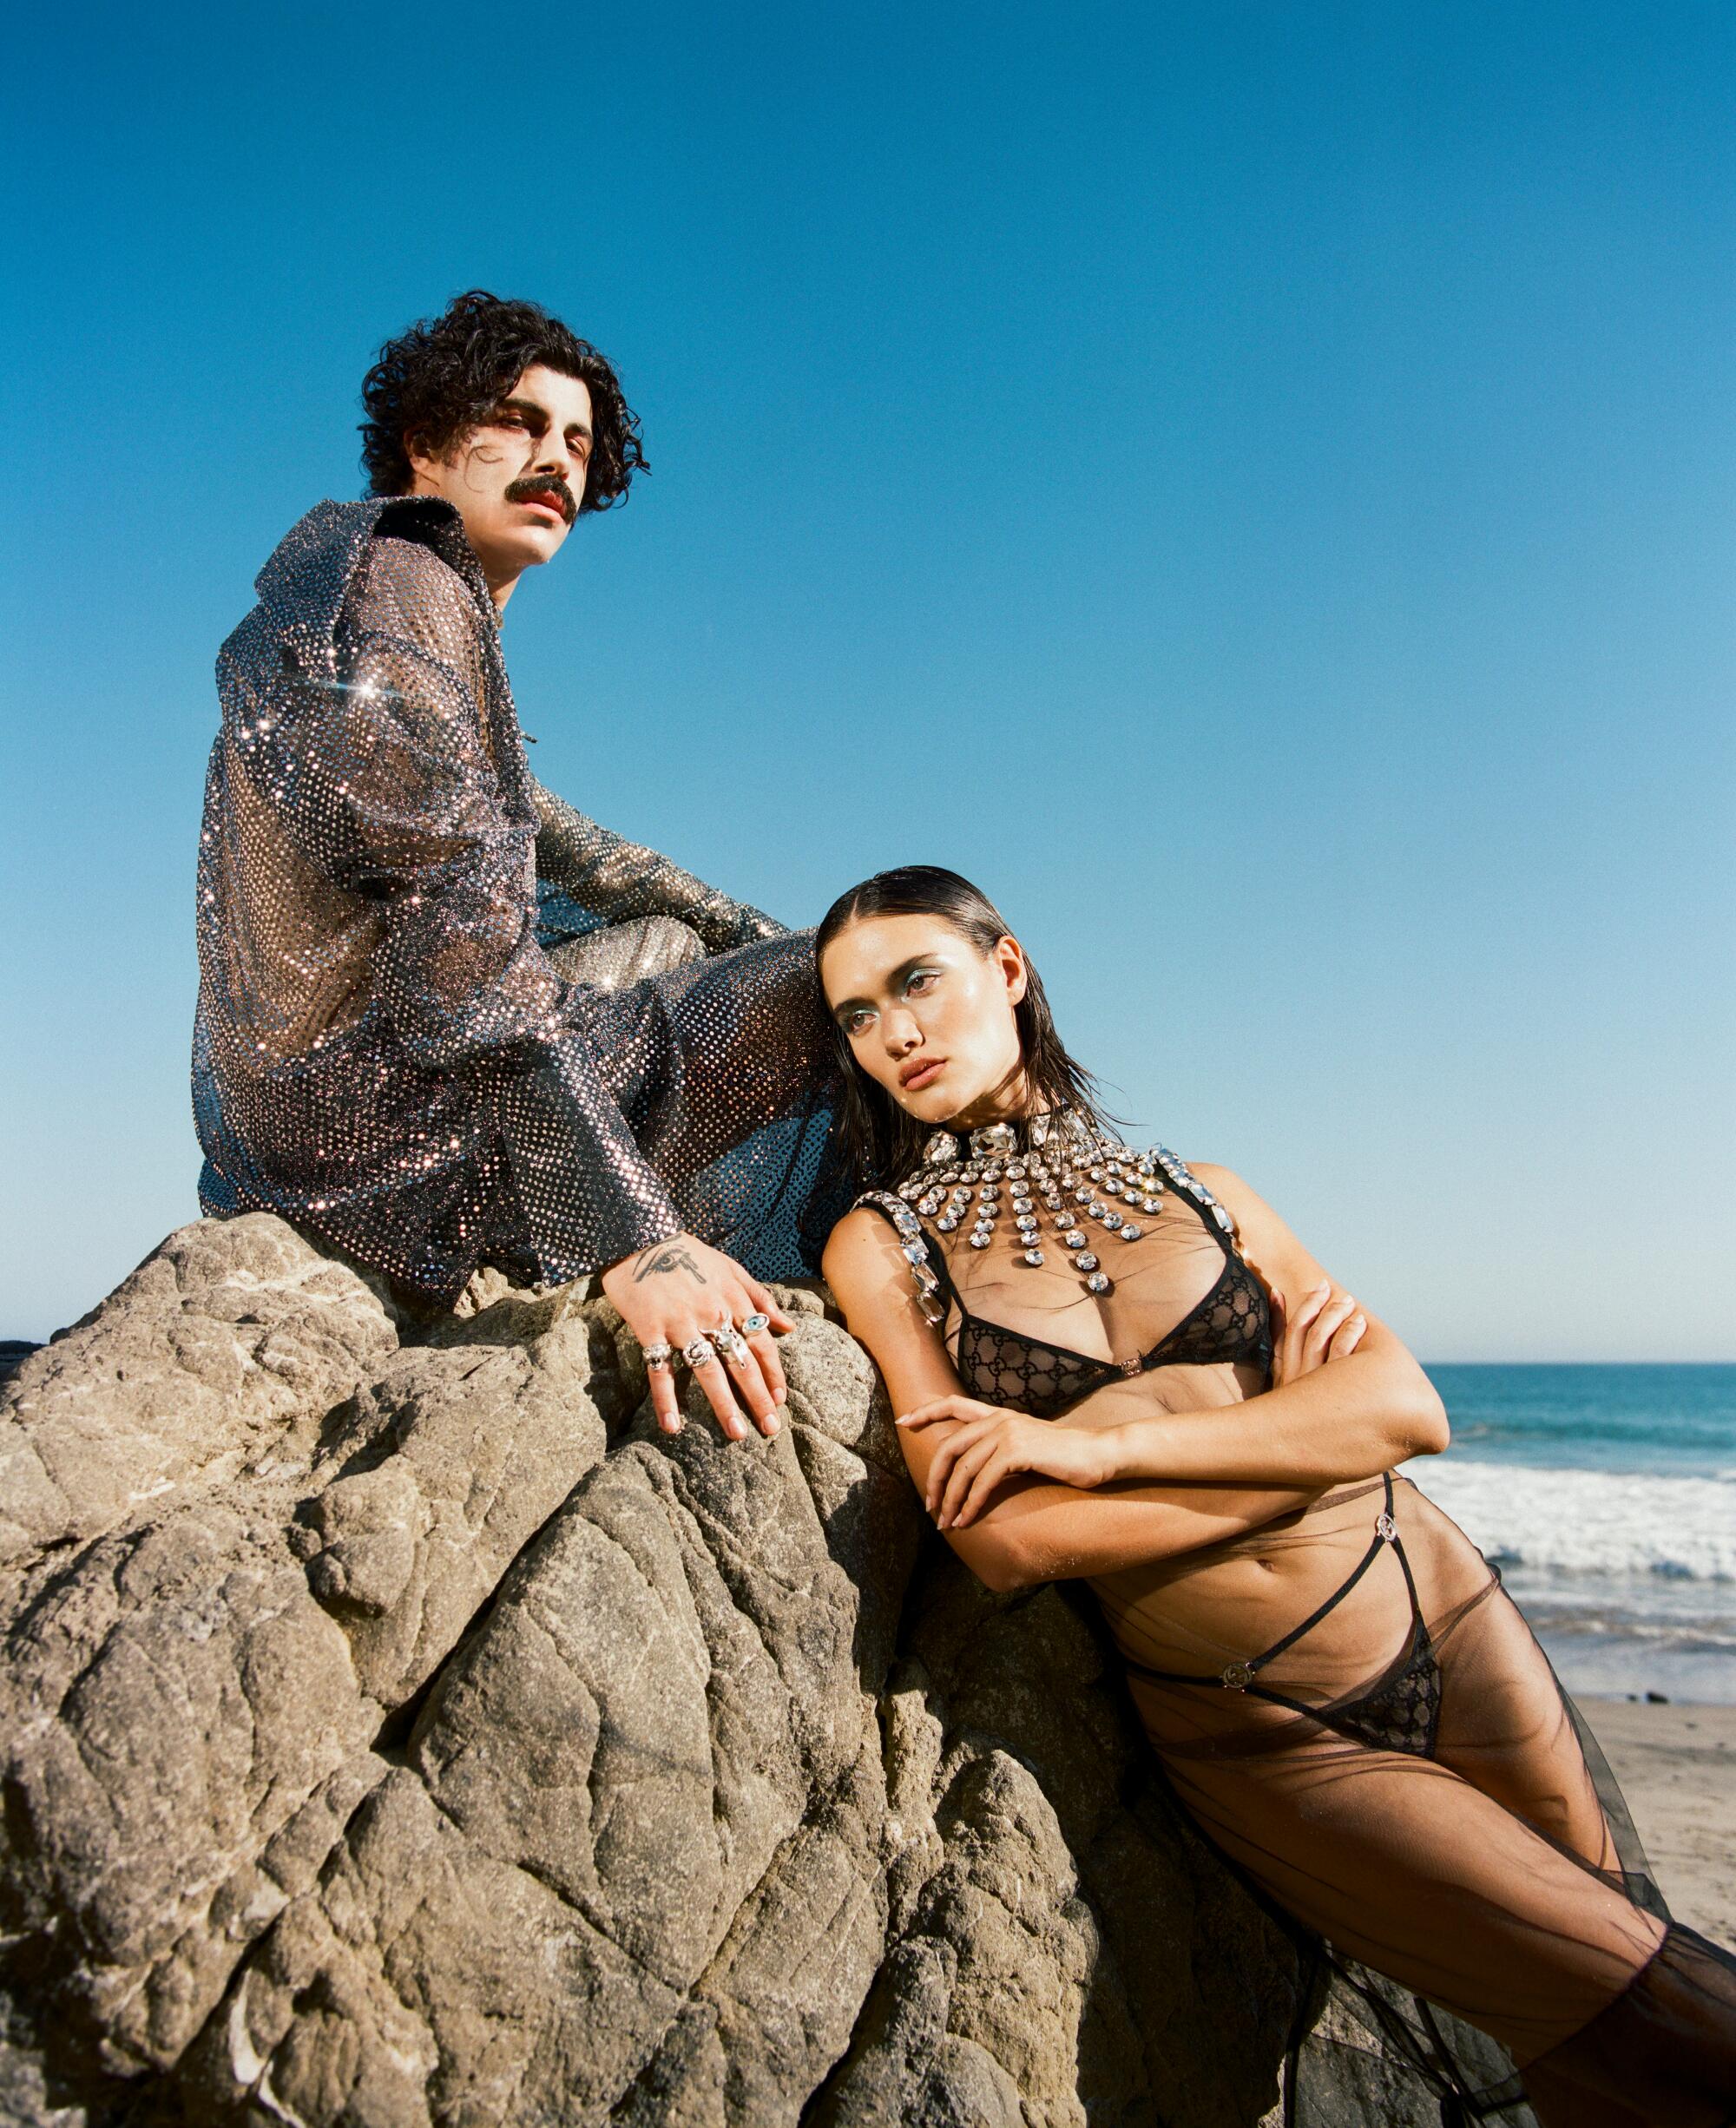 Two people sit on a rock on the beach. One wears a glittery outfit, the other wears black lingerie.